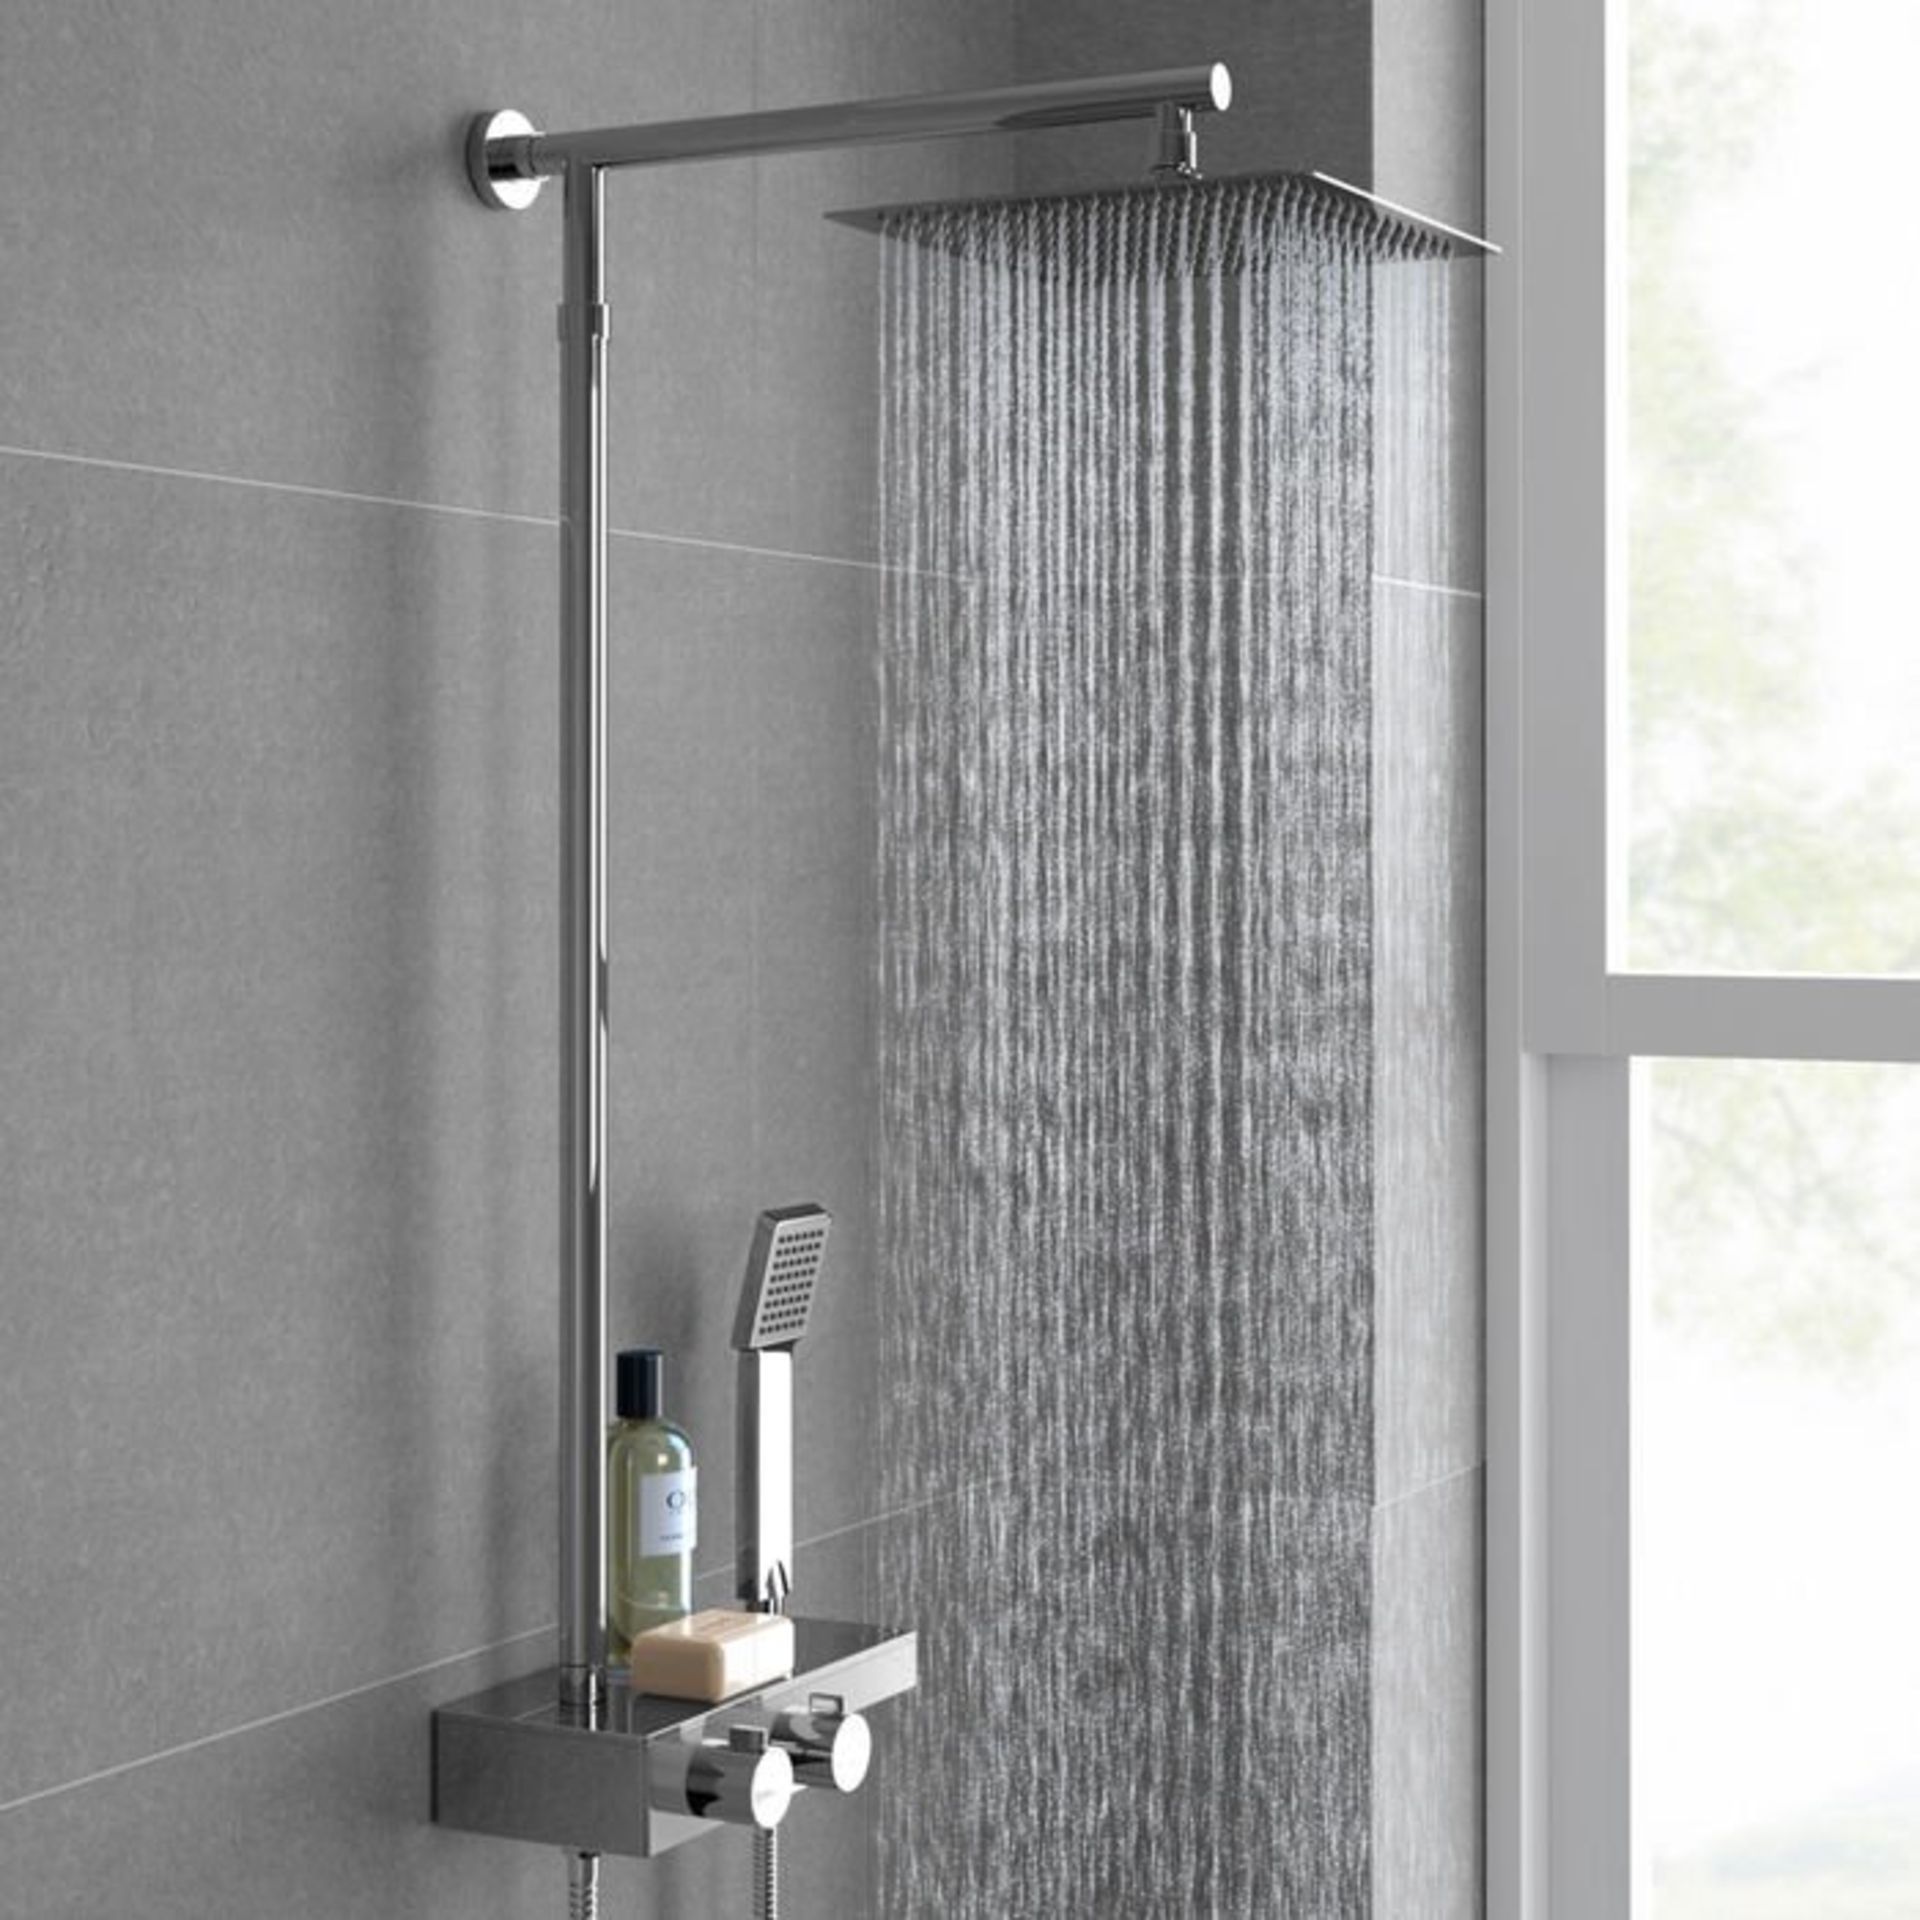 (V47) Thermostatic Exposed Shower Kit 250mm Square Head Handheld RRP £349.99 Style meets function - Image 2 of 3